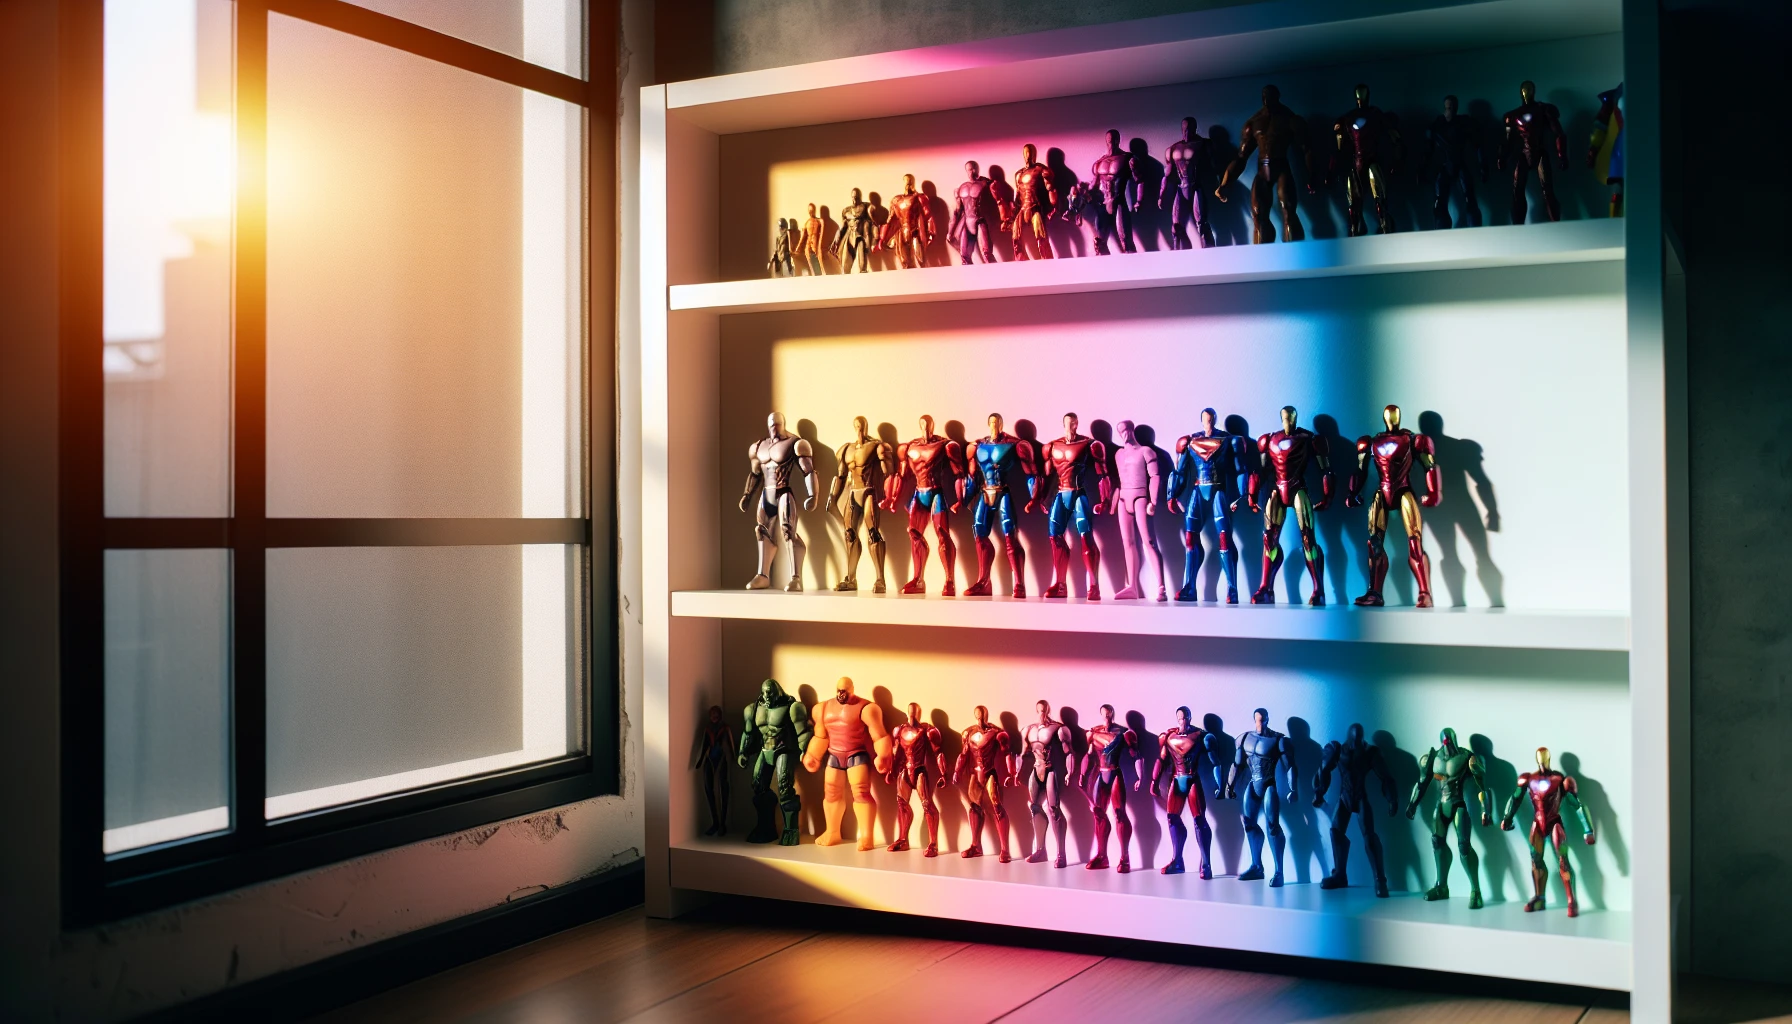 Action figures displayed on a shelf with direct sunlight shining through the window